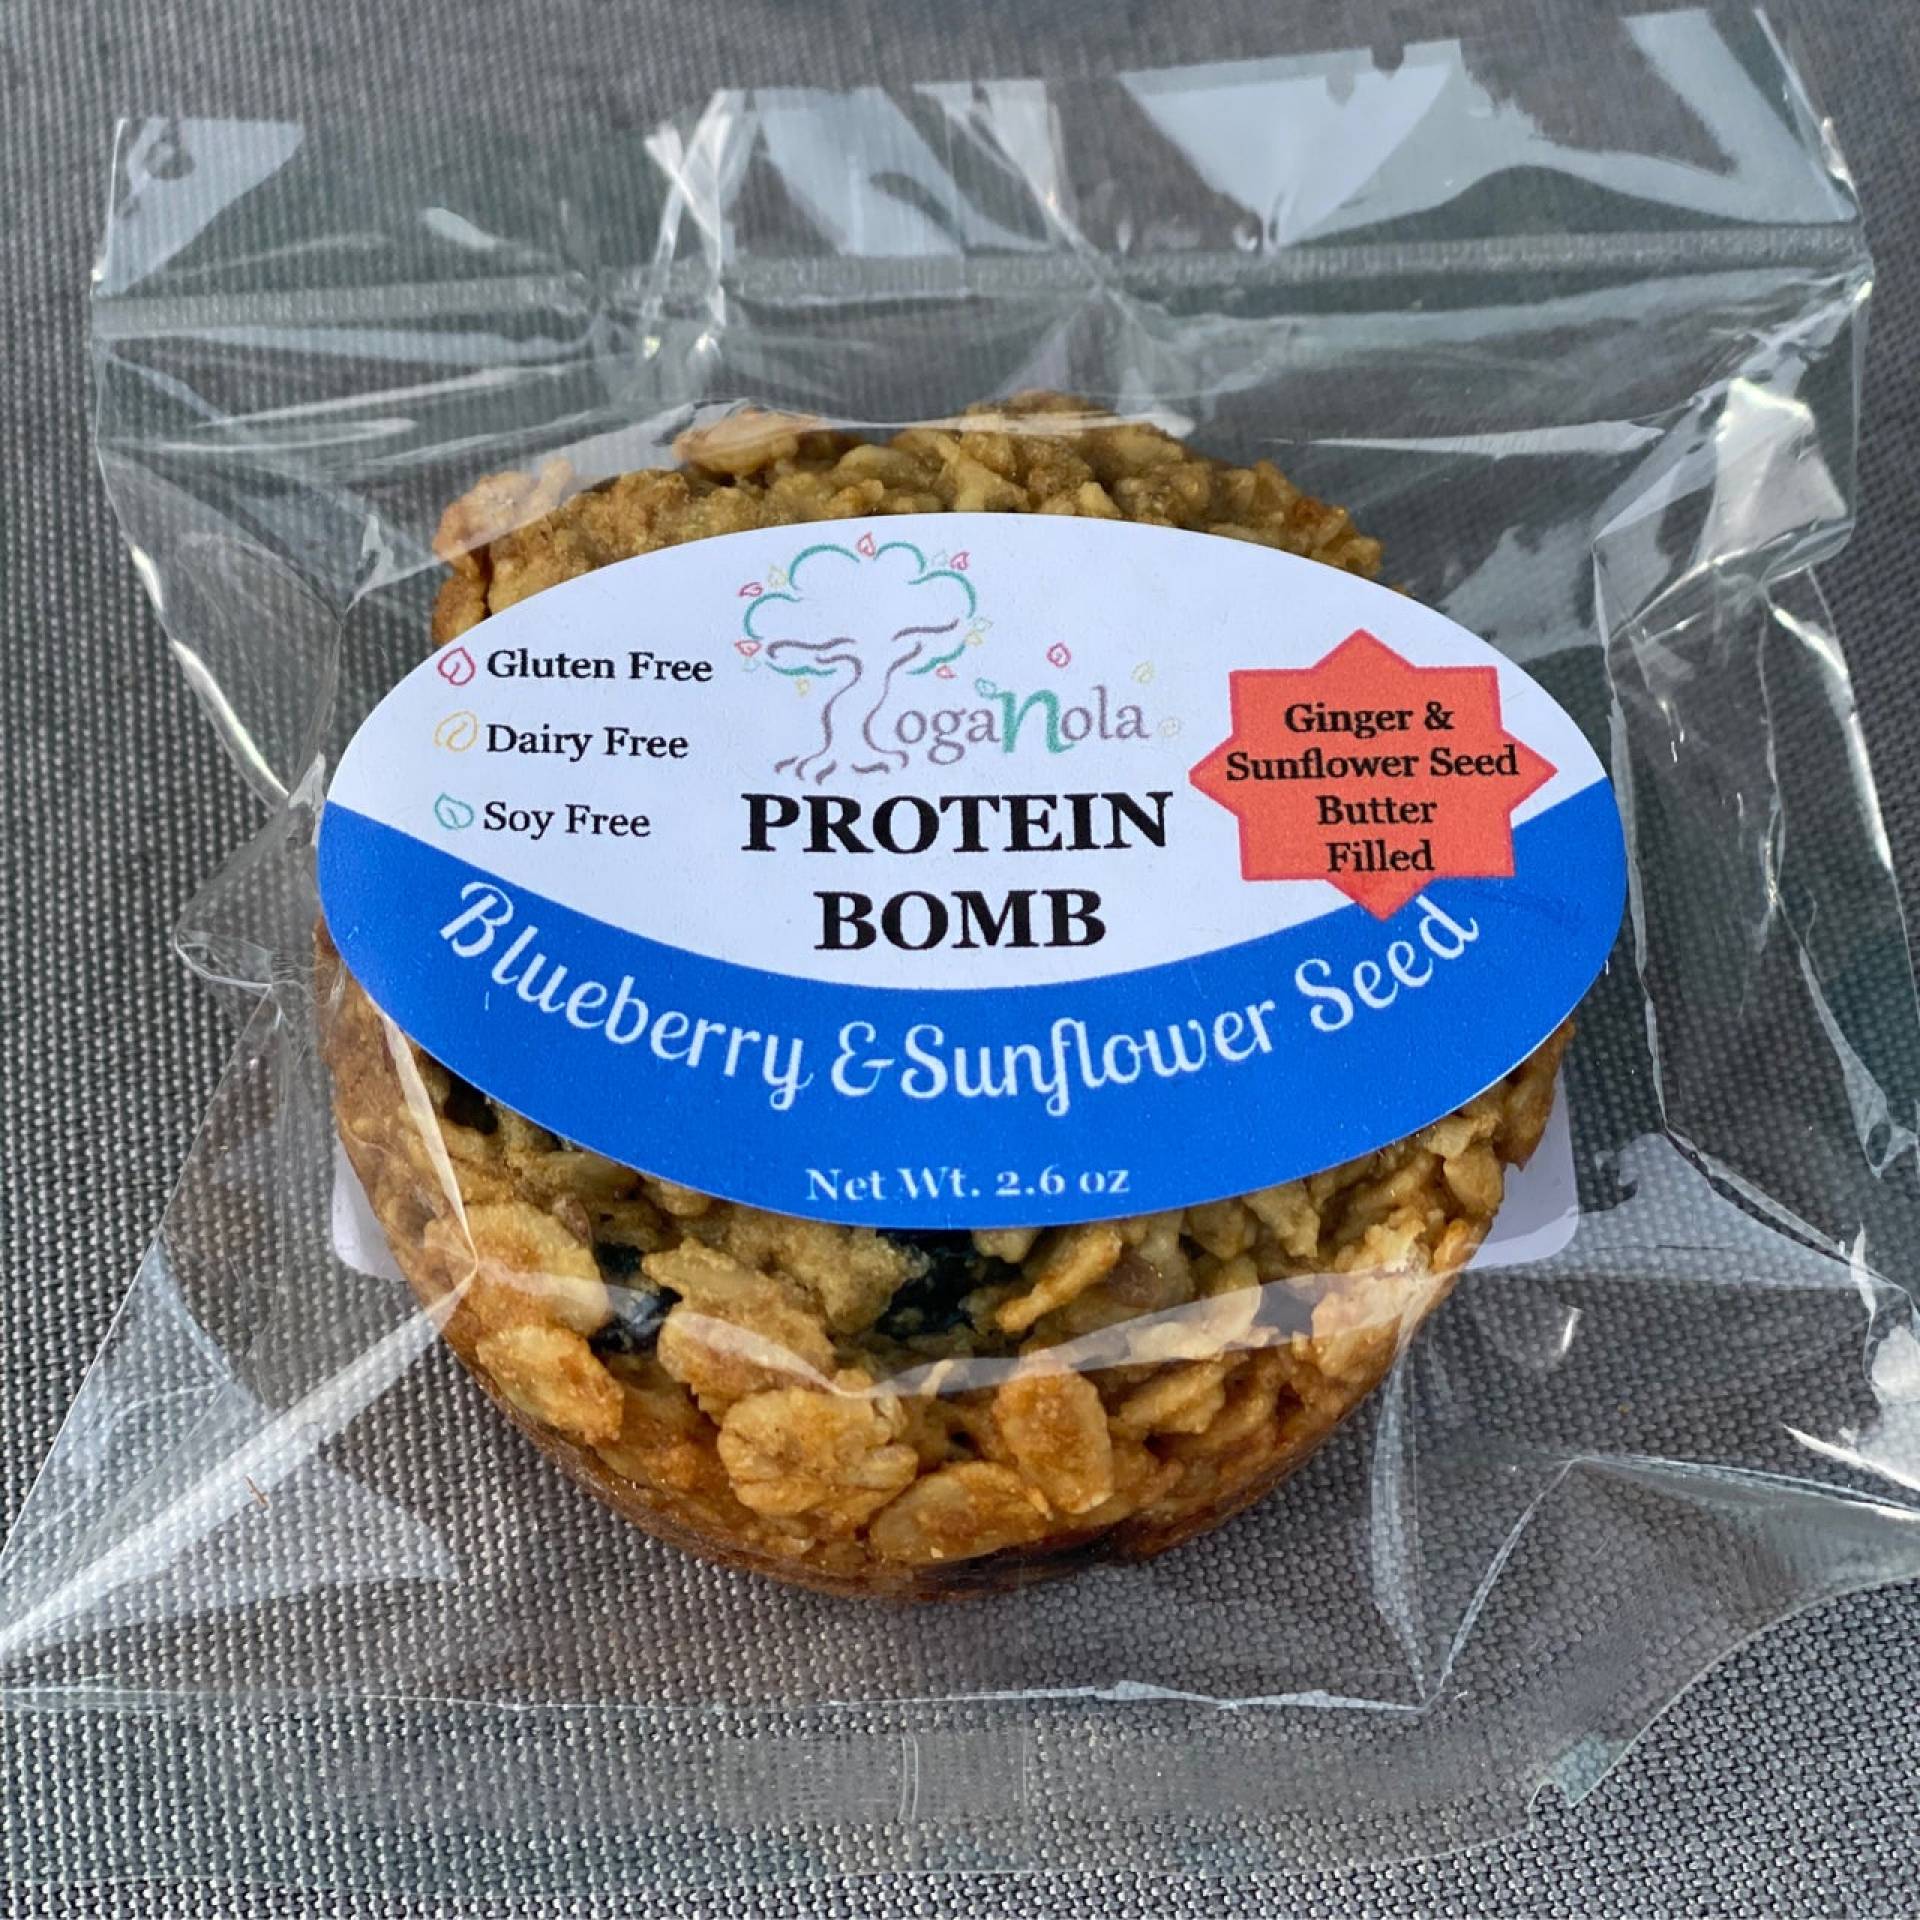 TogaNola: Blueberry and Sunflowerseed Protein Bomb (2 for $10)